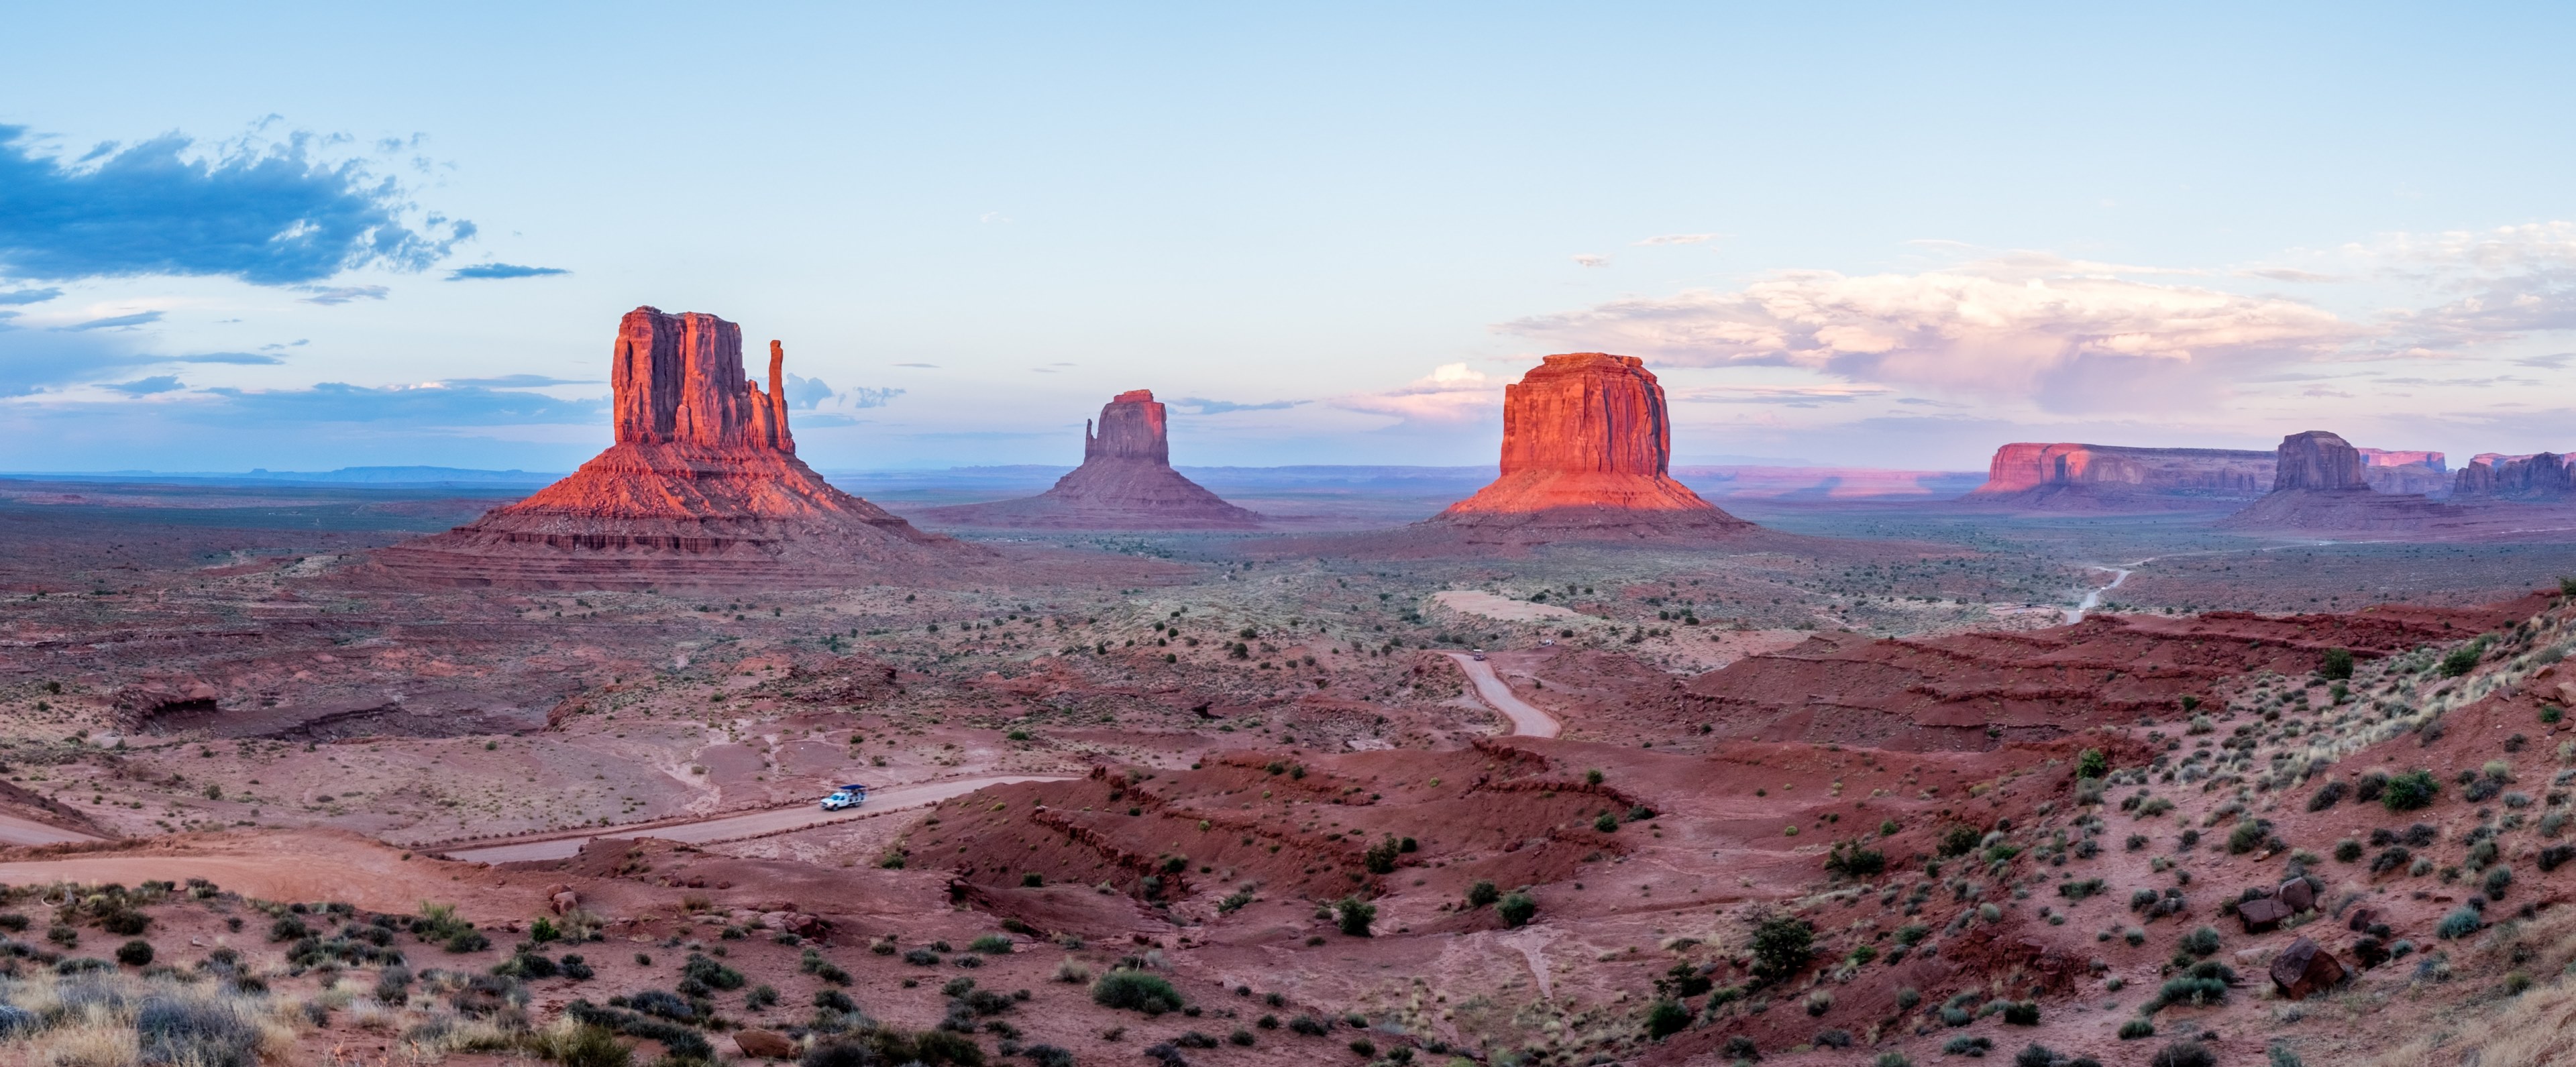 sunsets in the monument valley 4k wallpaper and background